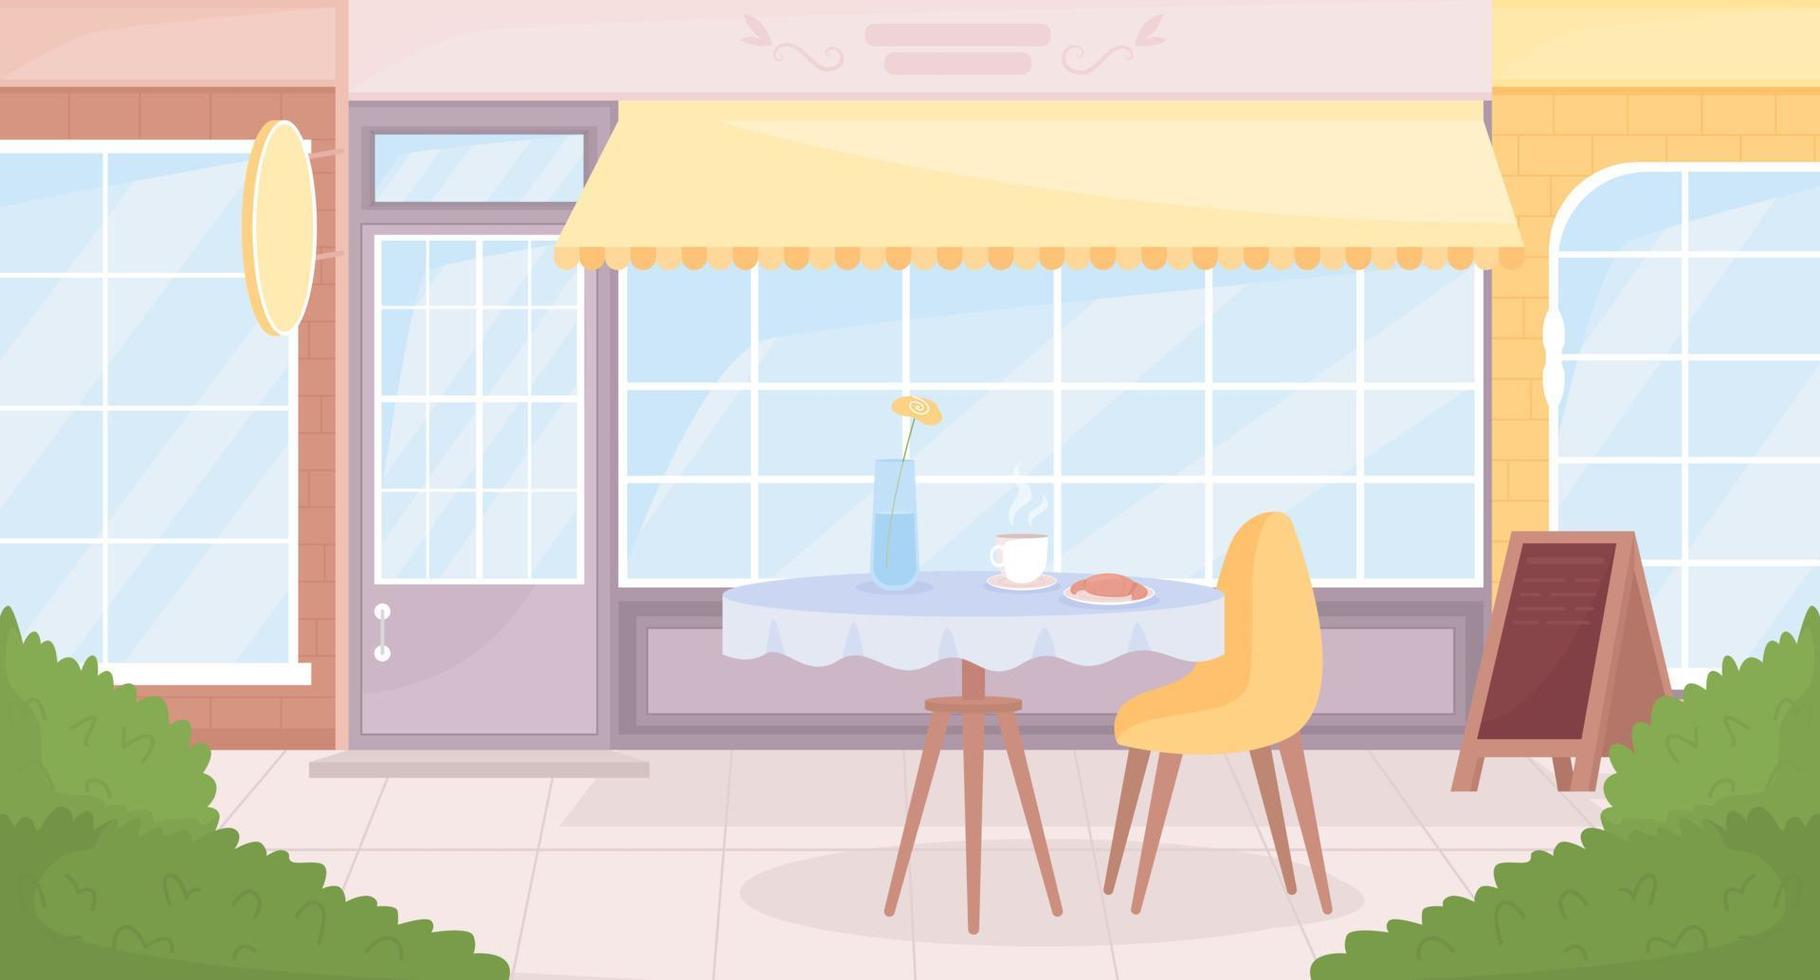 Cafe outdoor seating flat color vector illustration. Enjoying drink and food outside. Cozy dining option. Breakfast. Fully editable 2D simple cartoon cityscape with buildings exterior on background